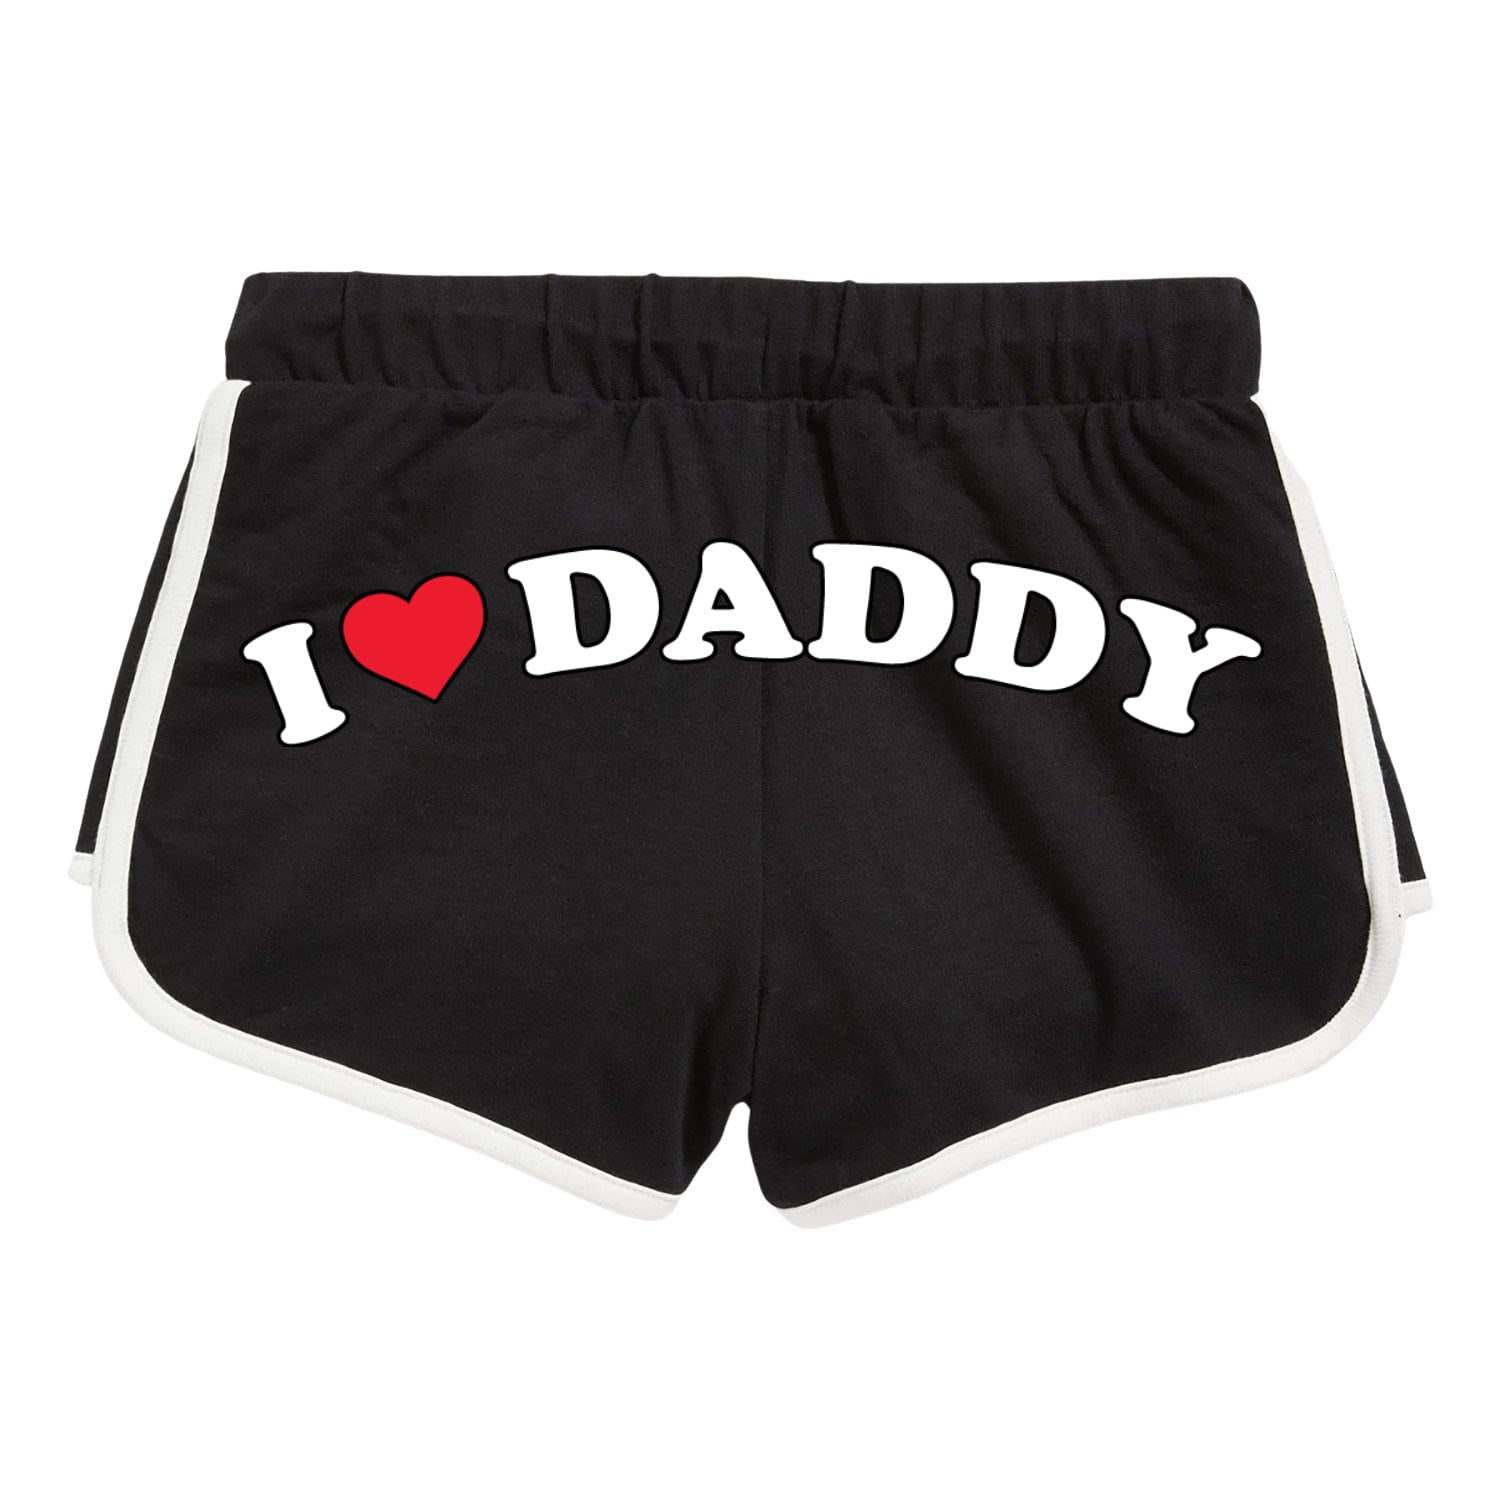 Daddy Boxers 